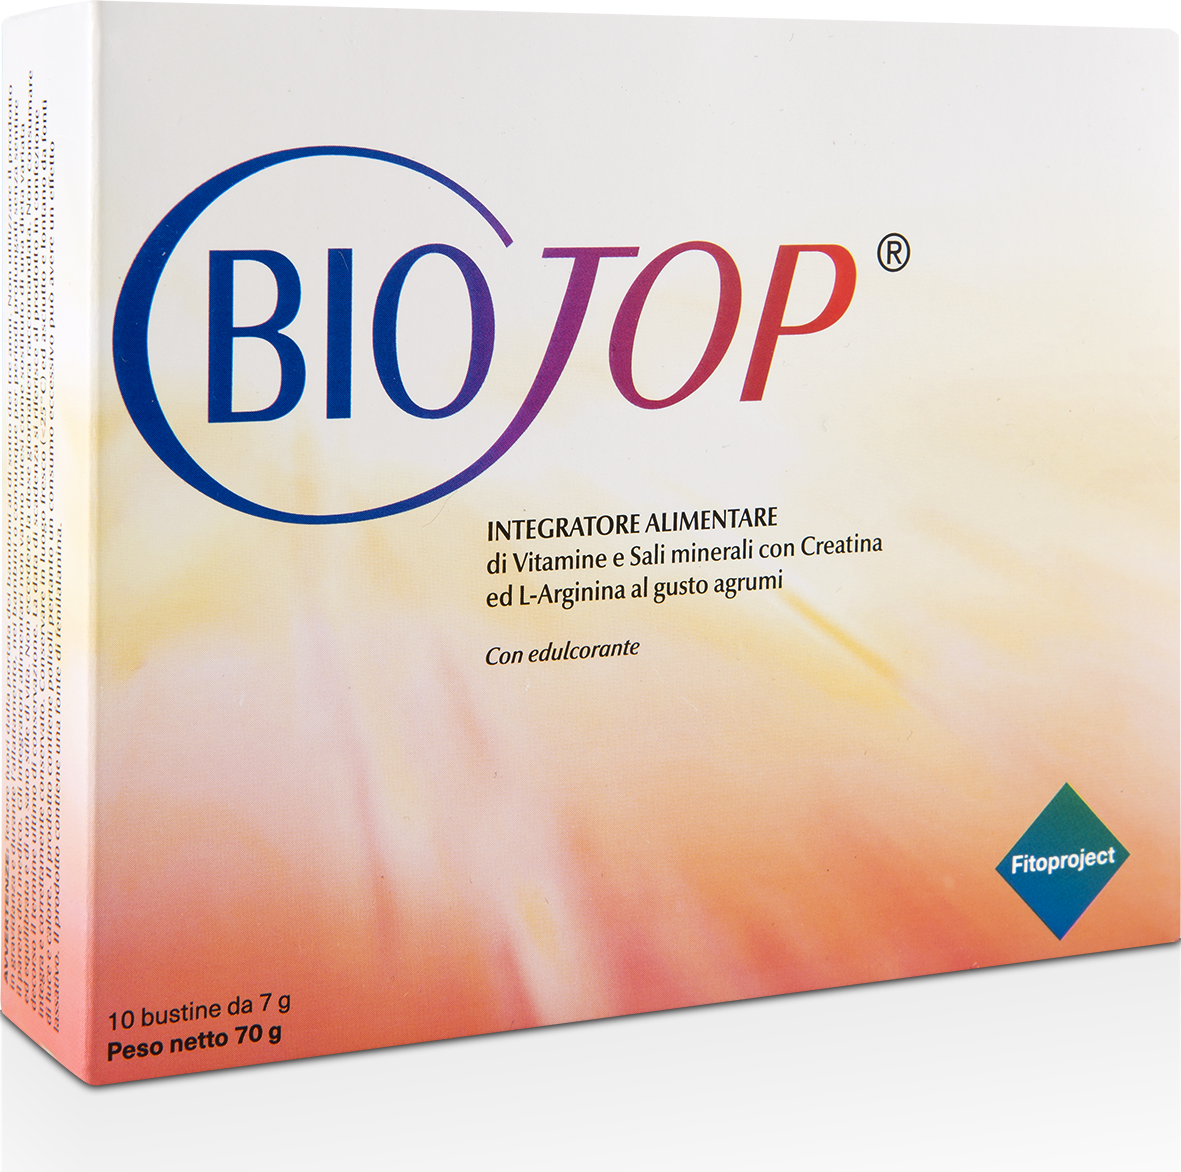 fitoproject srl biotop 10 bustine 7g